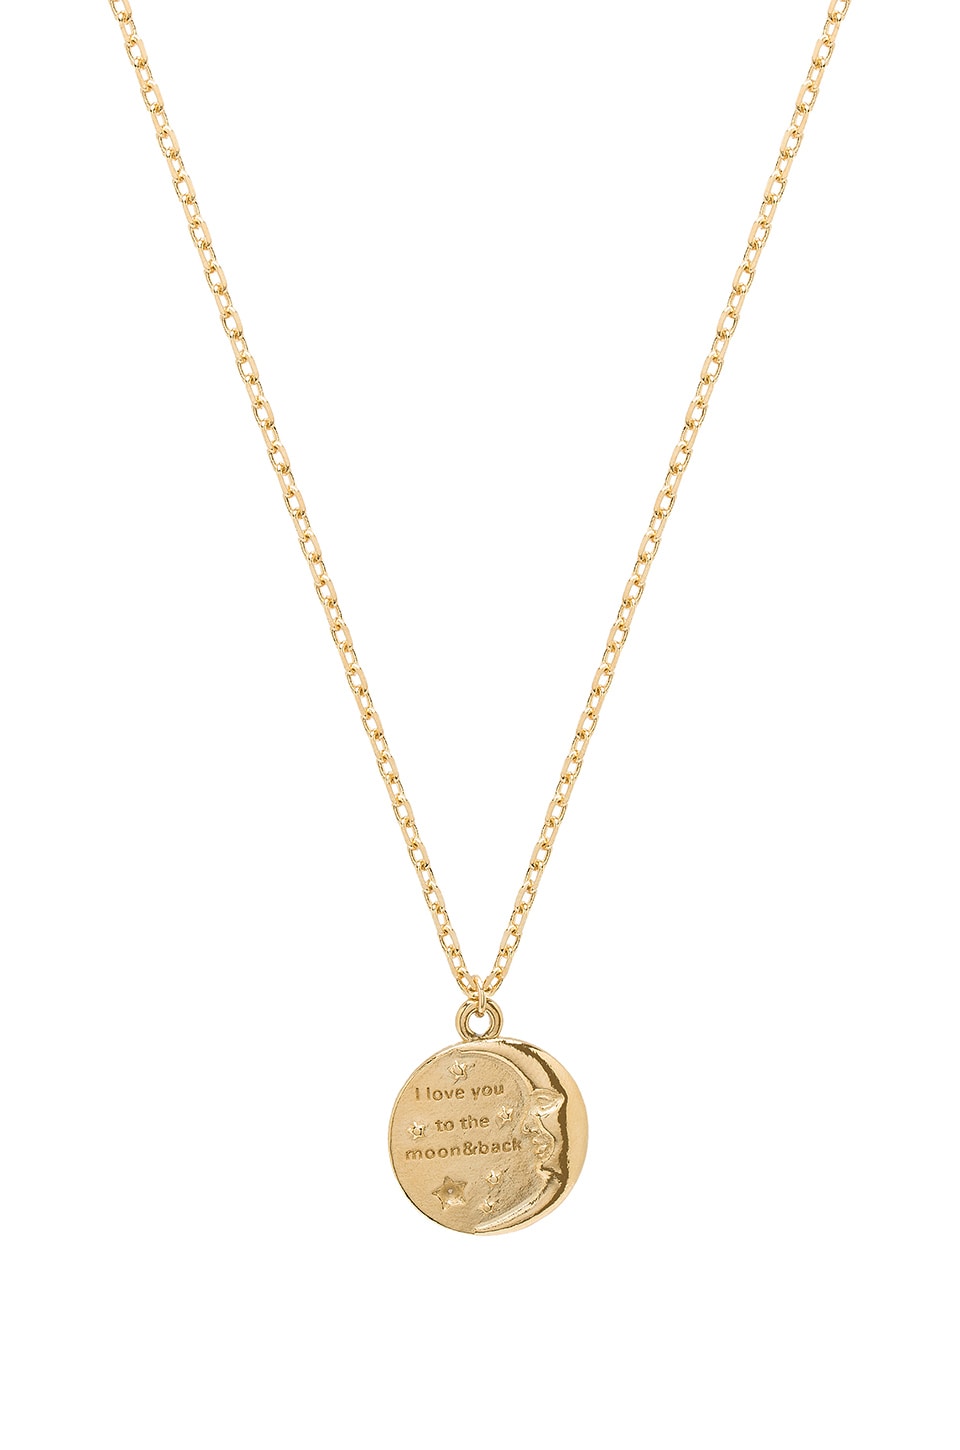 JOOLZ BY MARTHA CALVO TO THE MOON & BACK NECKLACE